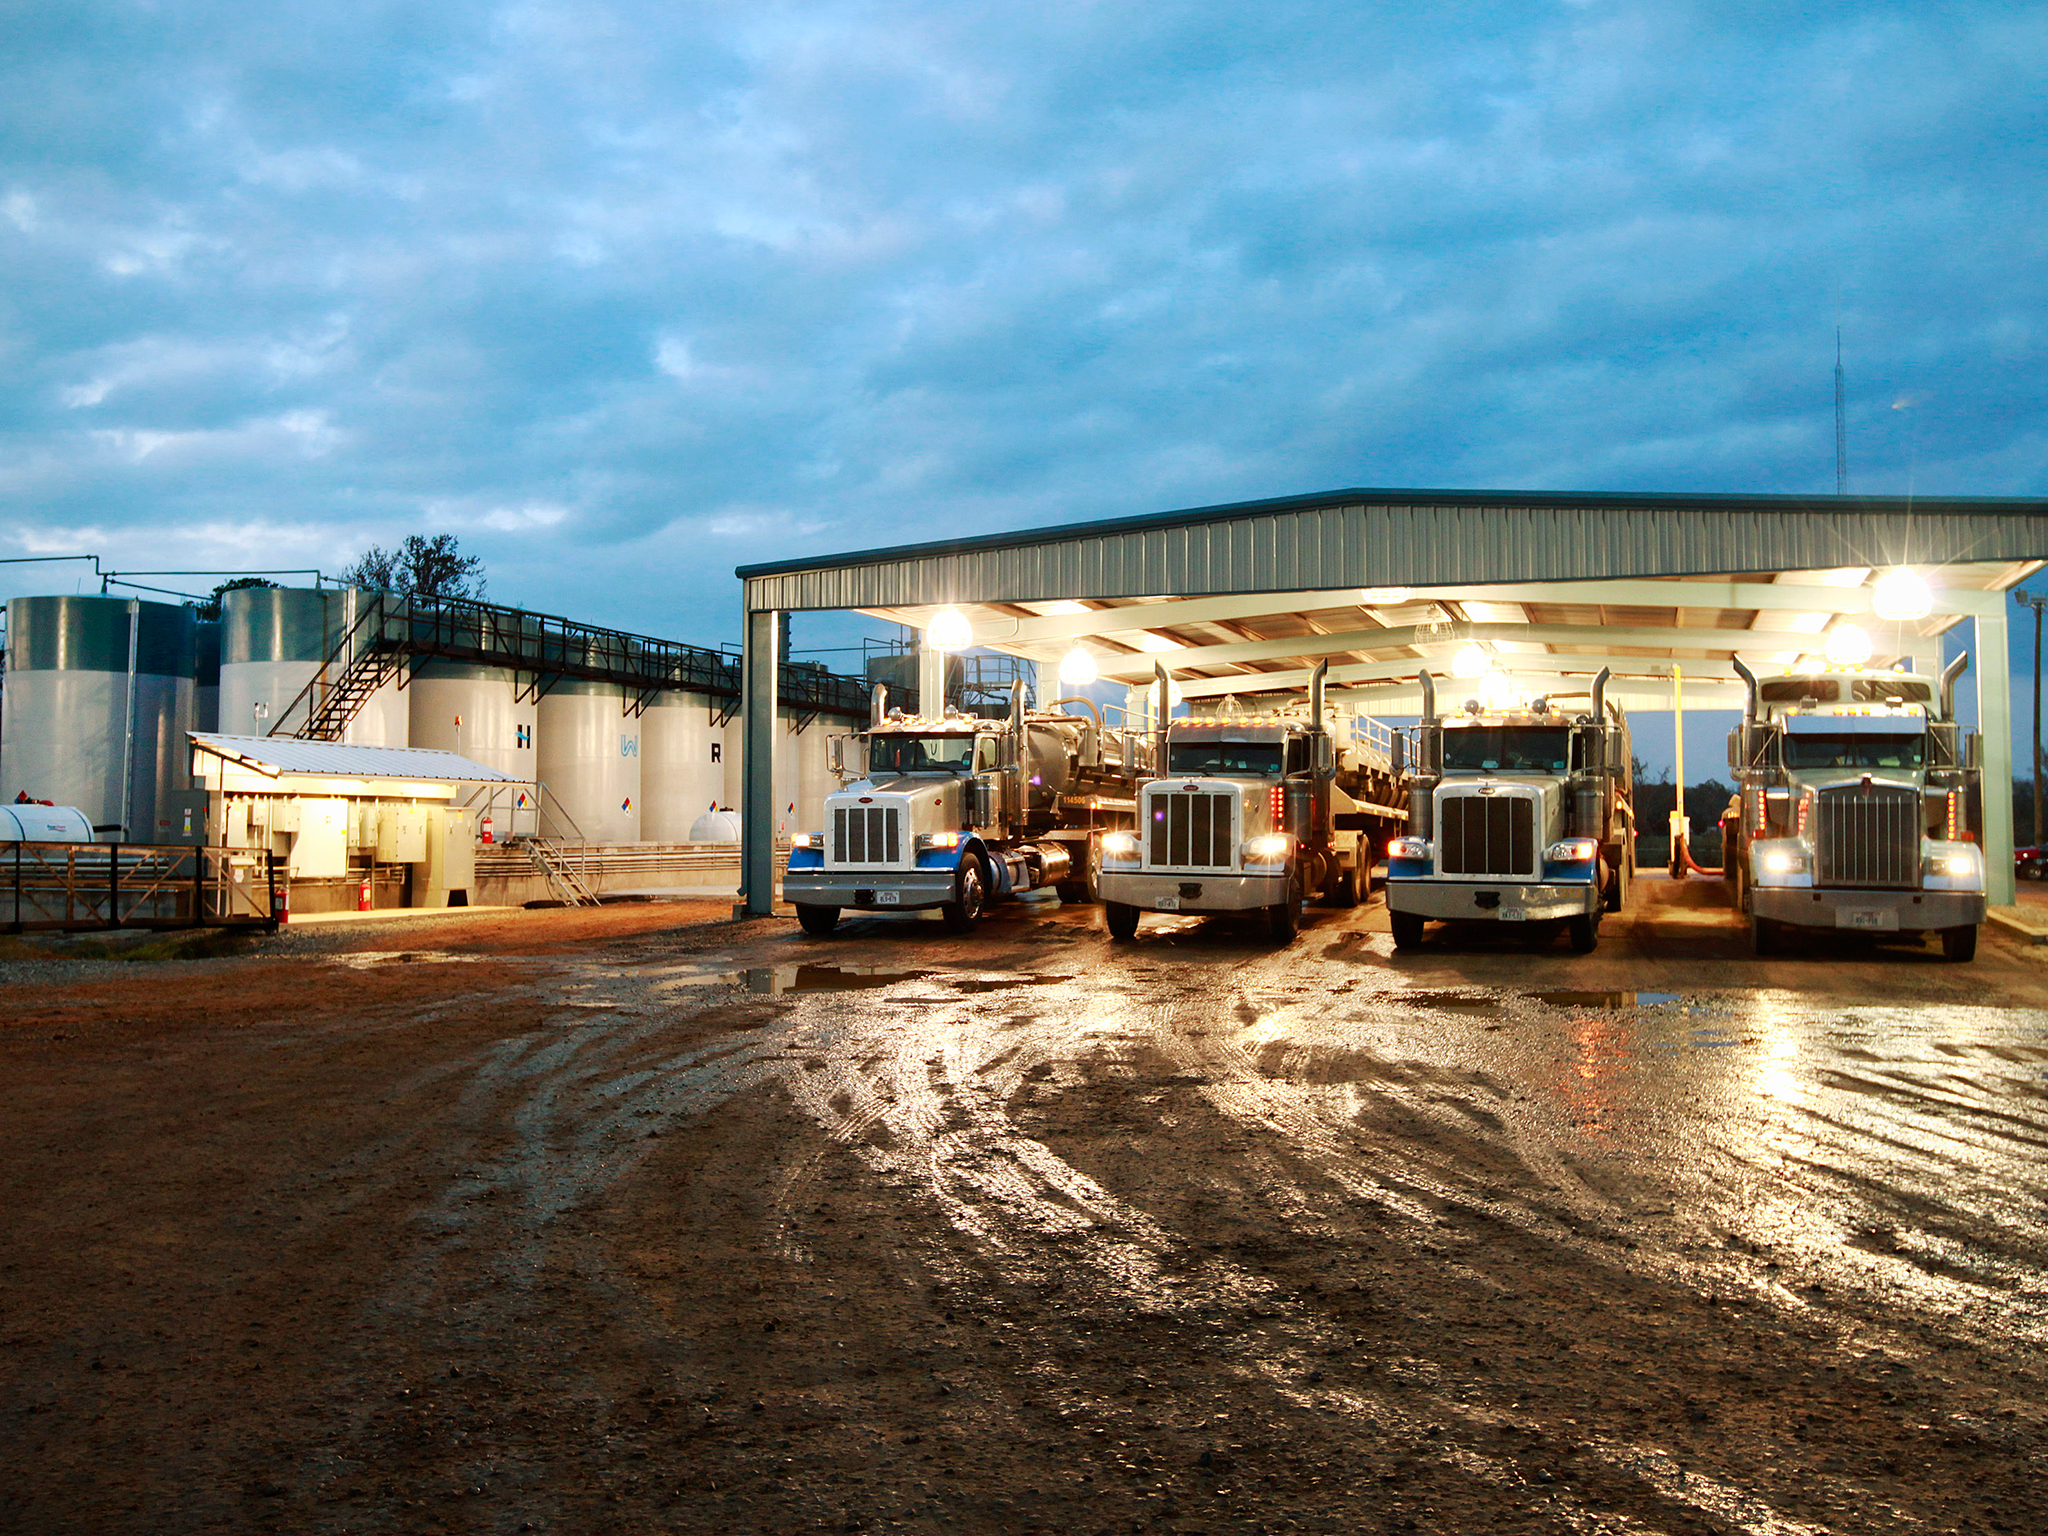 Transport trucks are parked at a Heckmann Water Resources (HWR) treatment plant that separates oil, sediment and water mixed during the hydraulic fracturing process, near Shreveport, Louisiana.
